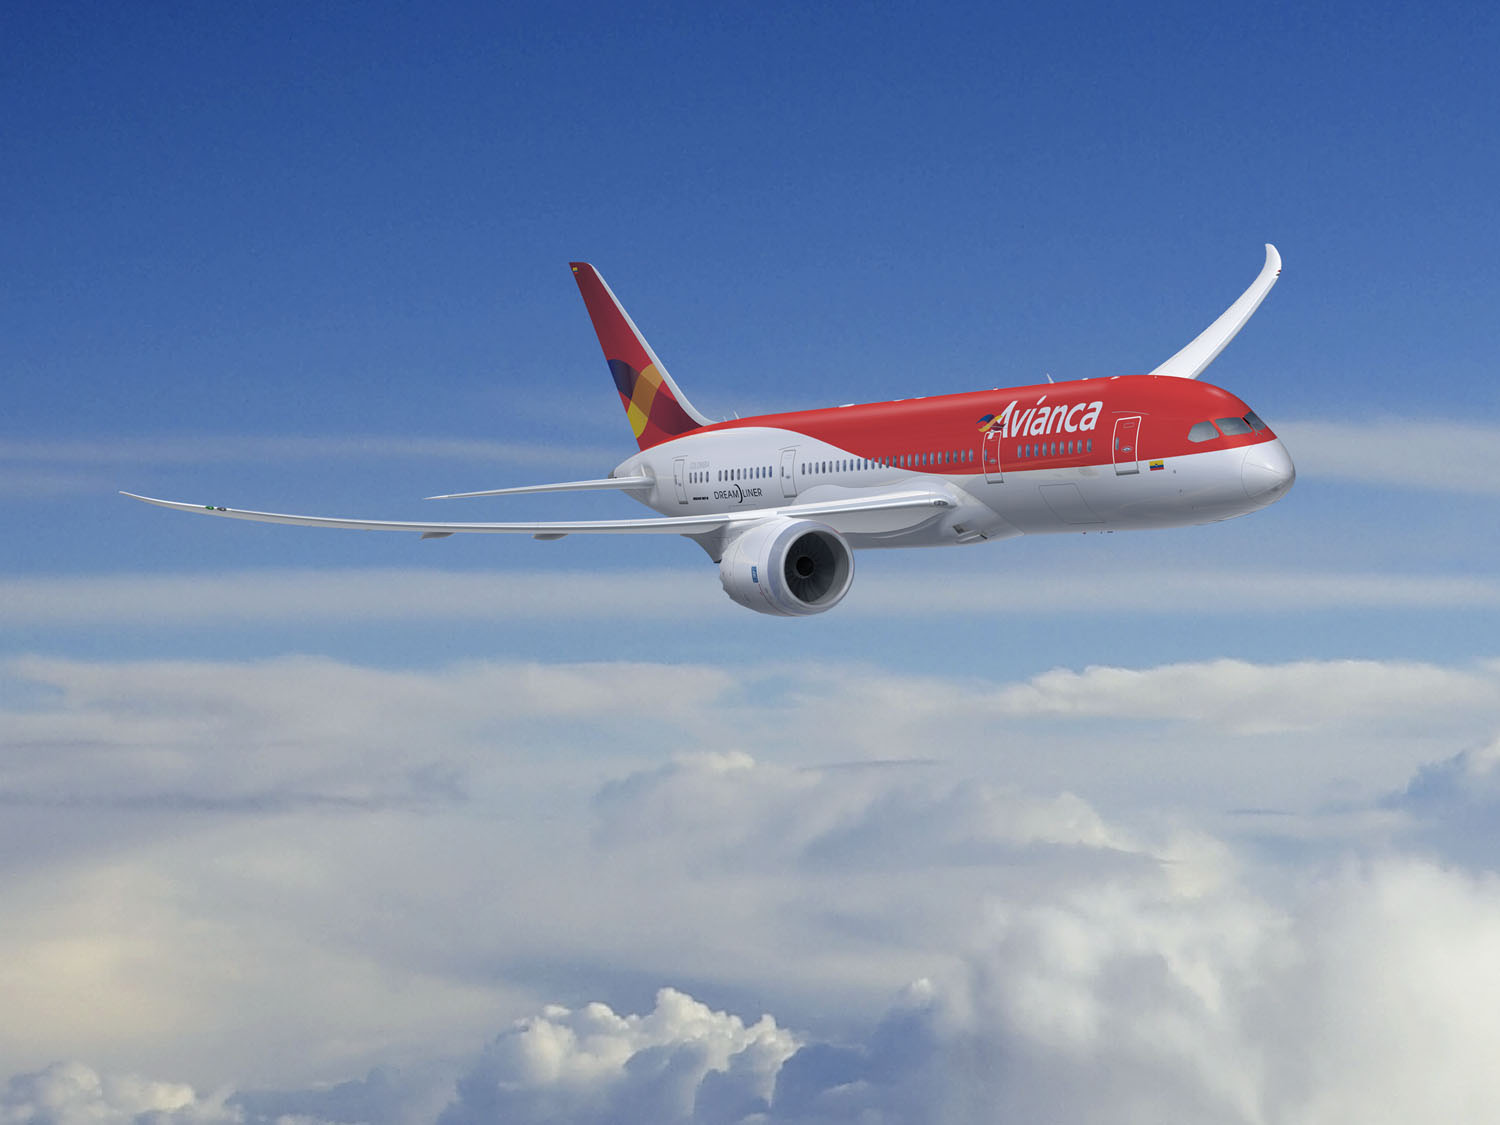 SMBC Aviation Capital delivers 787-8 to Avianca